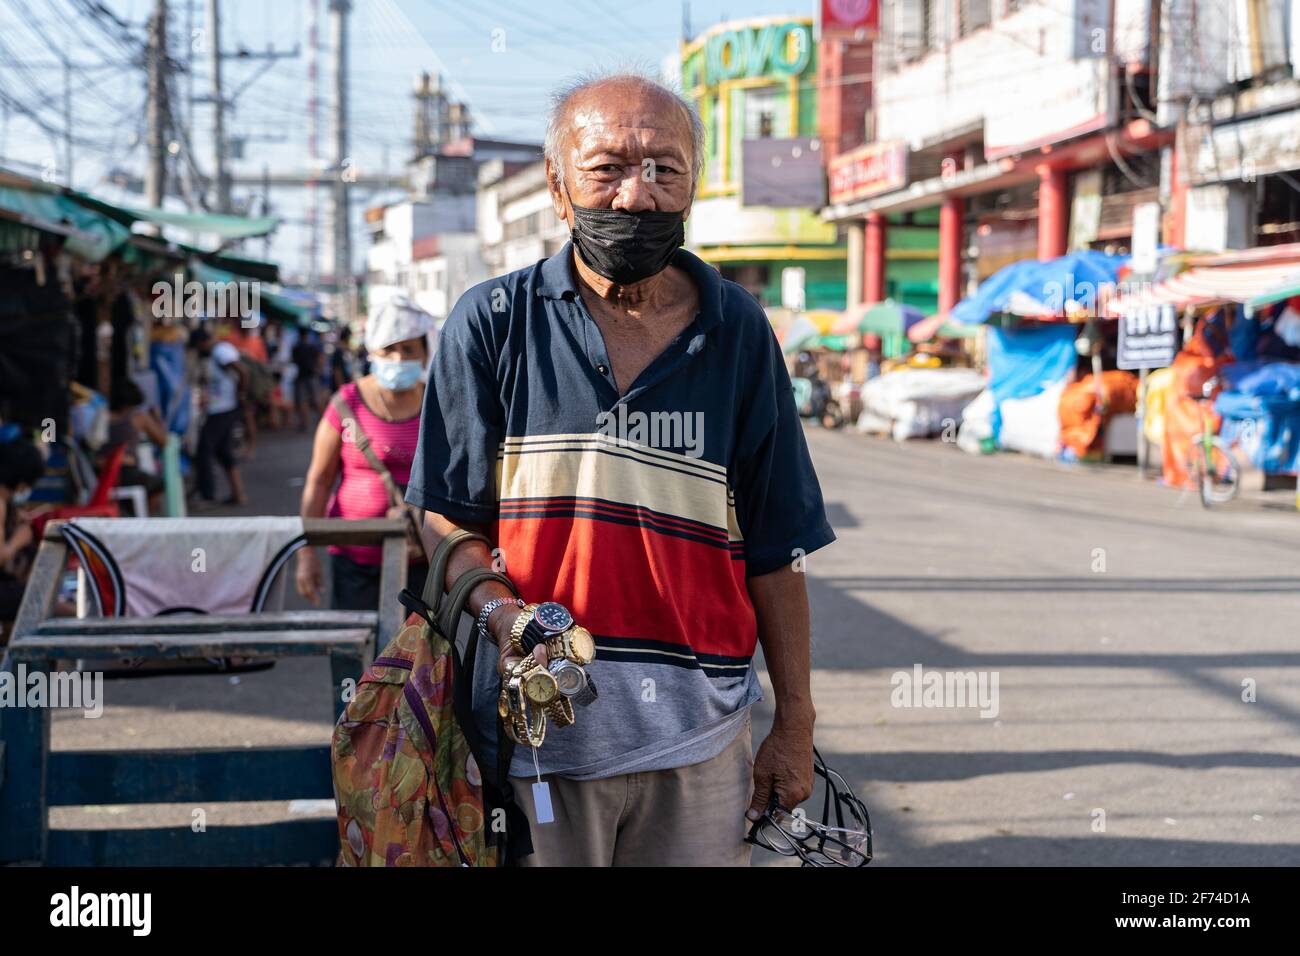 A man wearing a face mask during Covid-19, selling watches and face shields in a poor area of Cebu City, Philippines Stock Photo